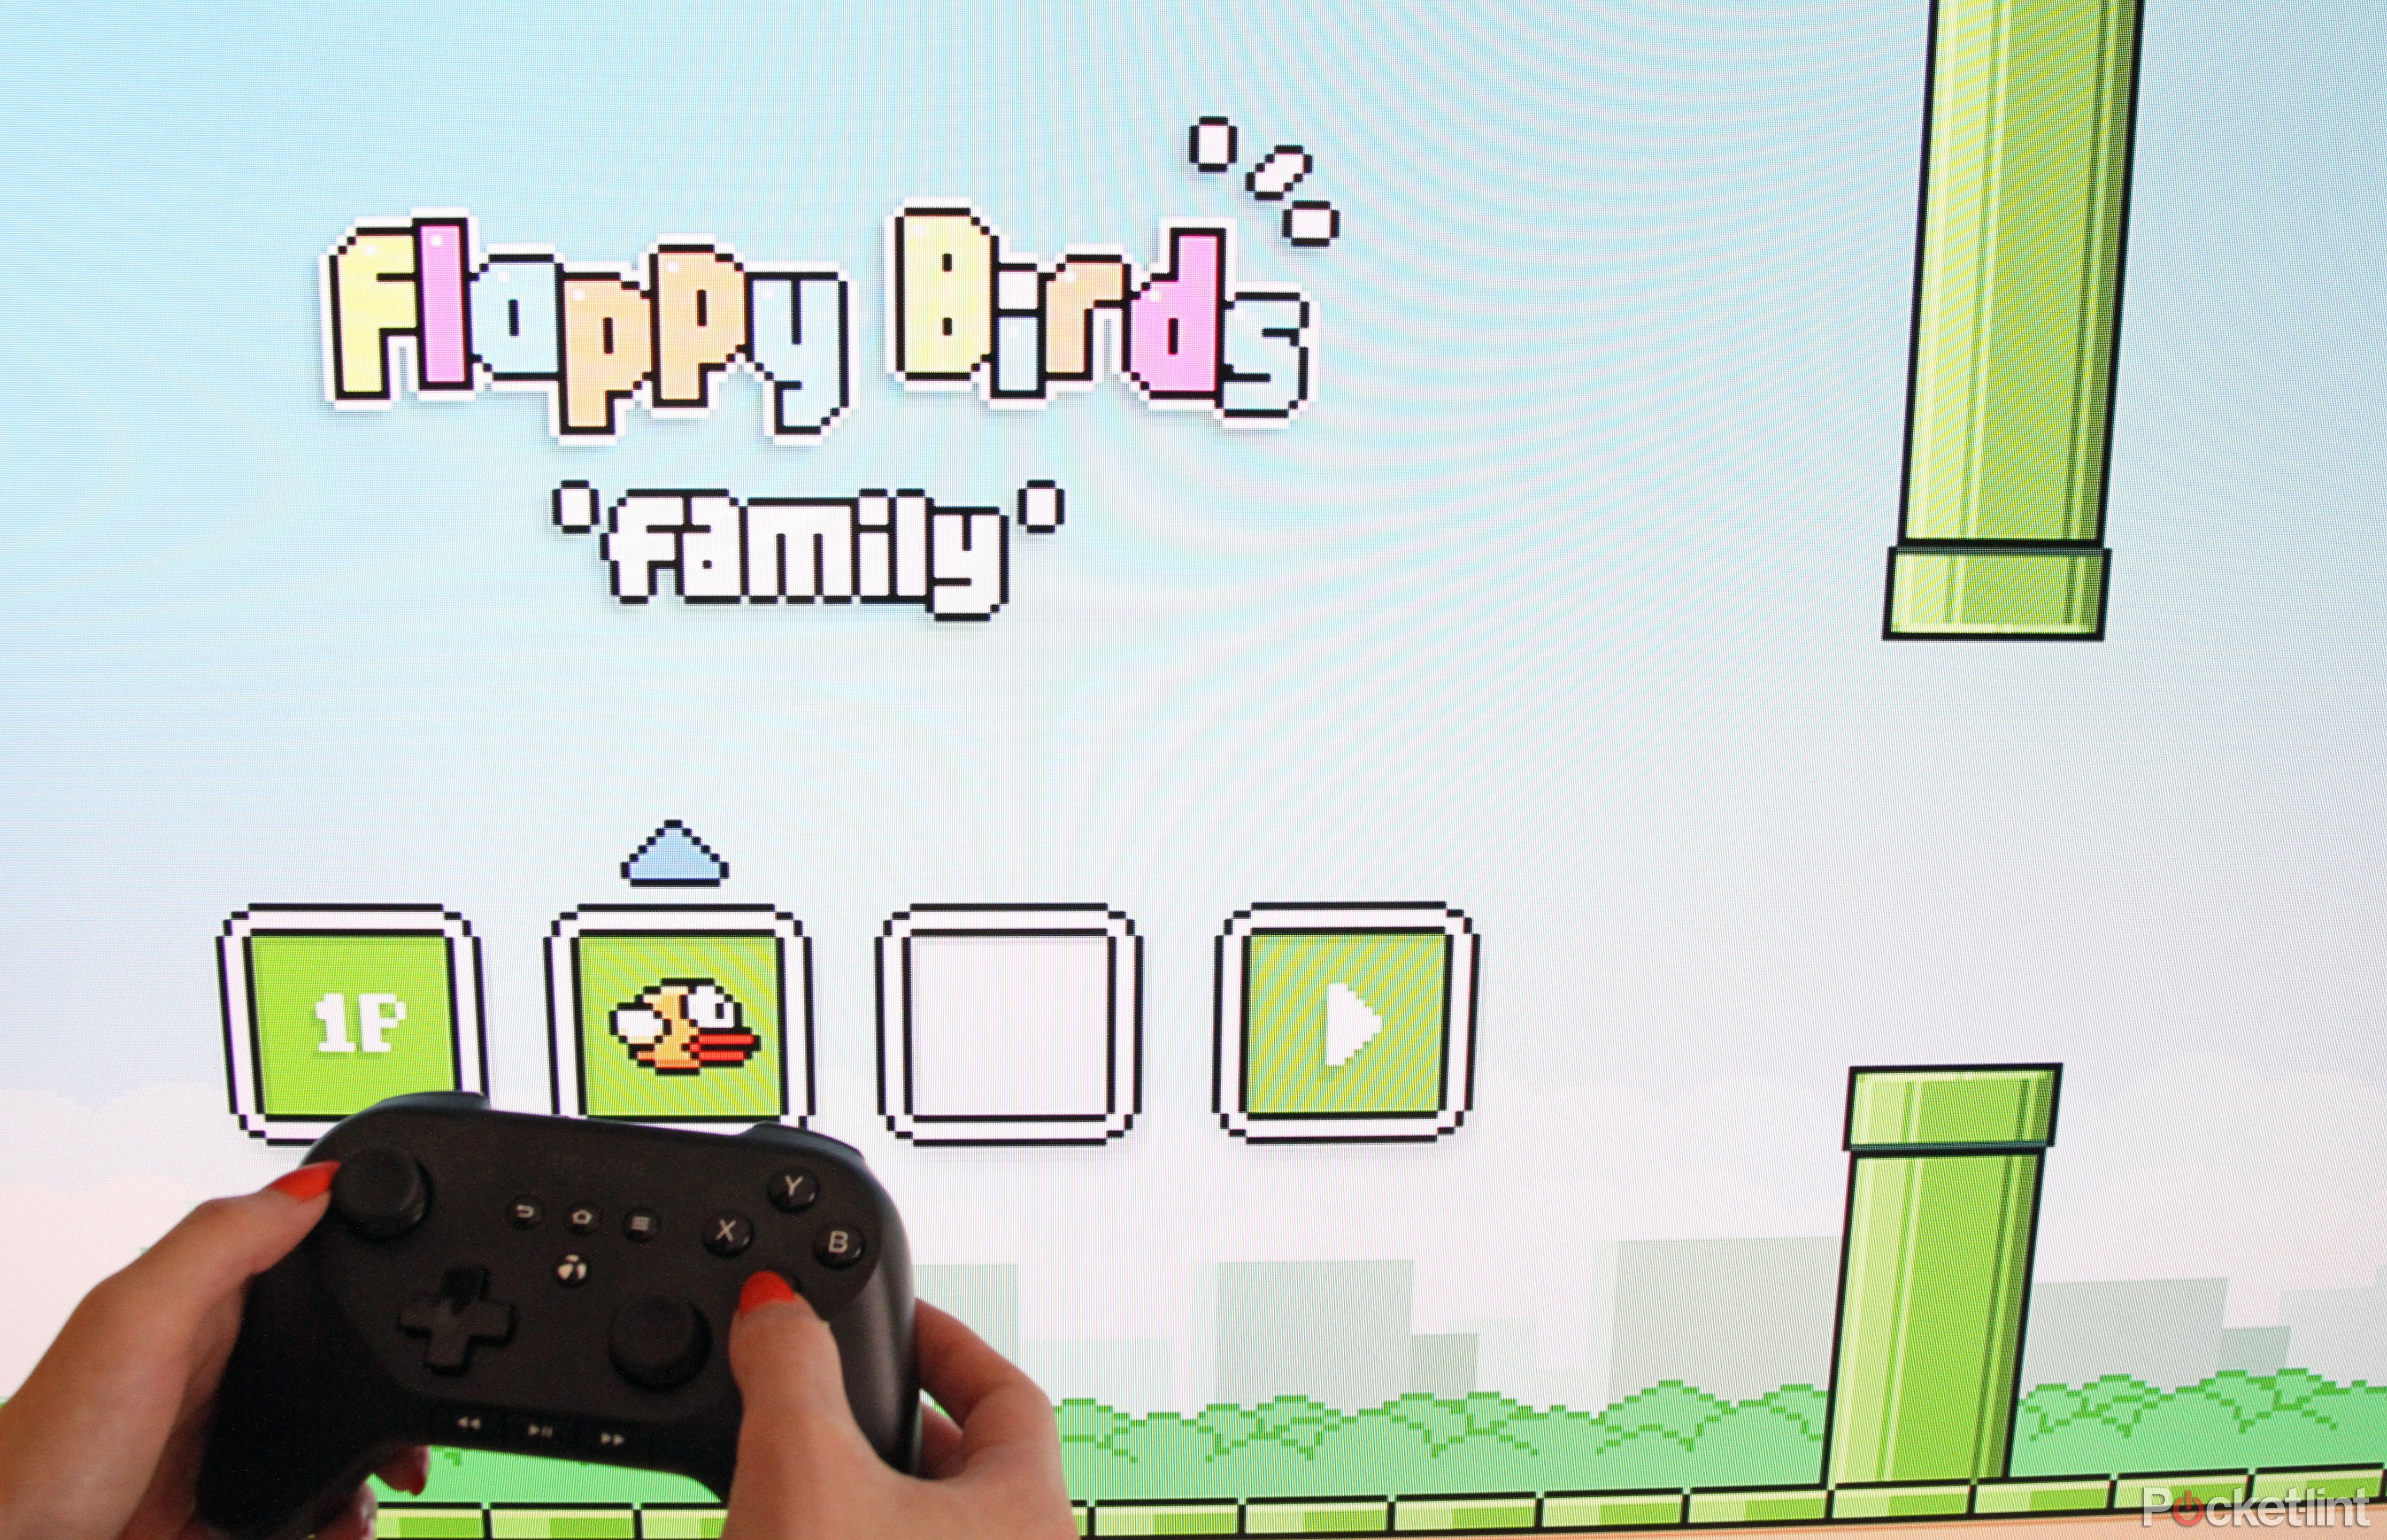 flappy birds family with multiplayer we go hands on image 1